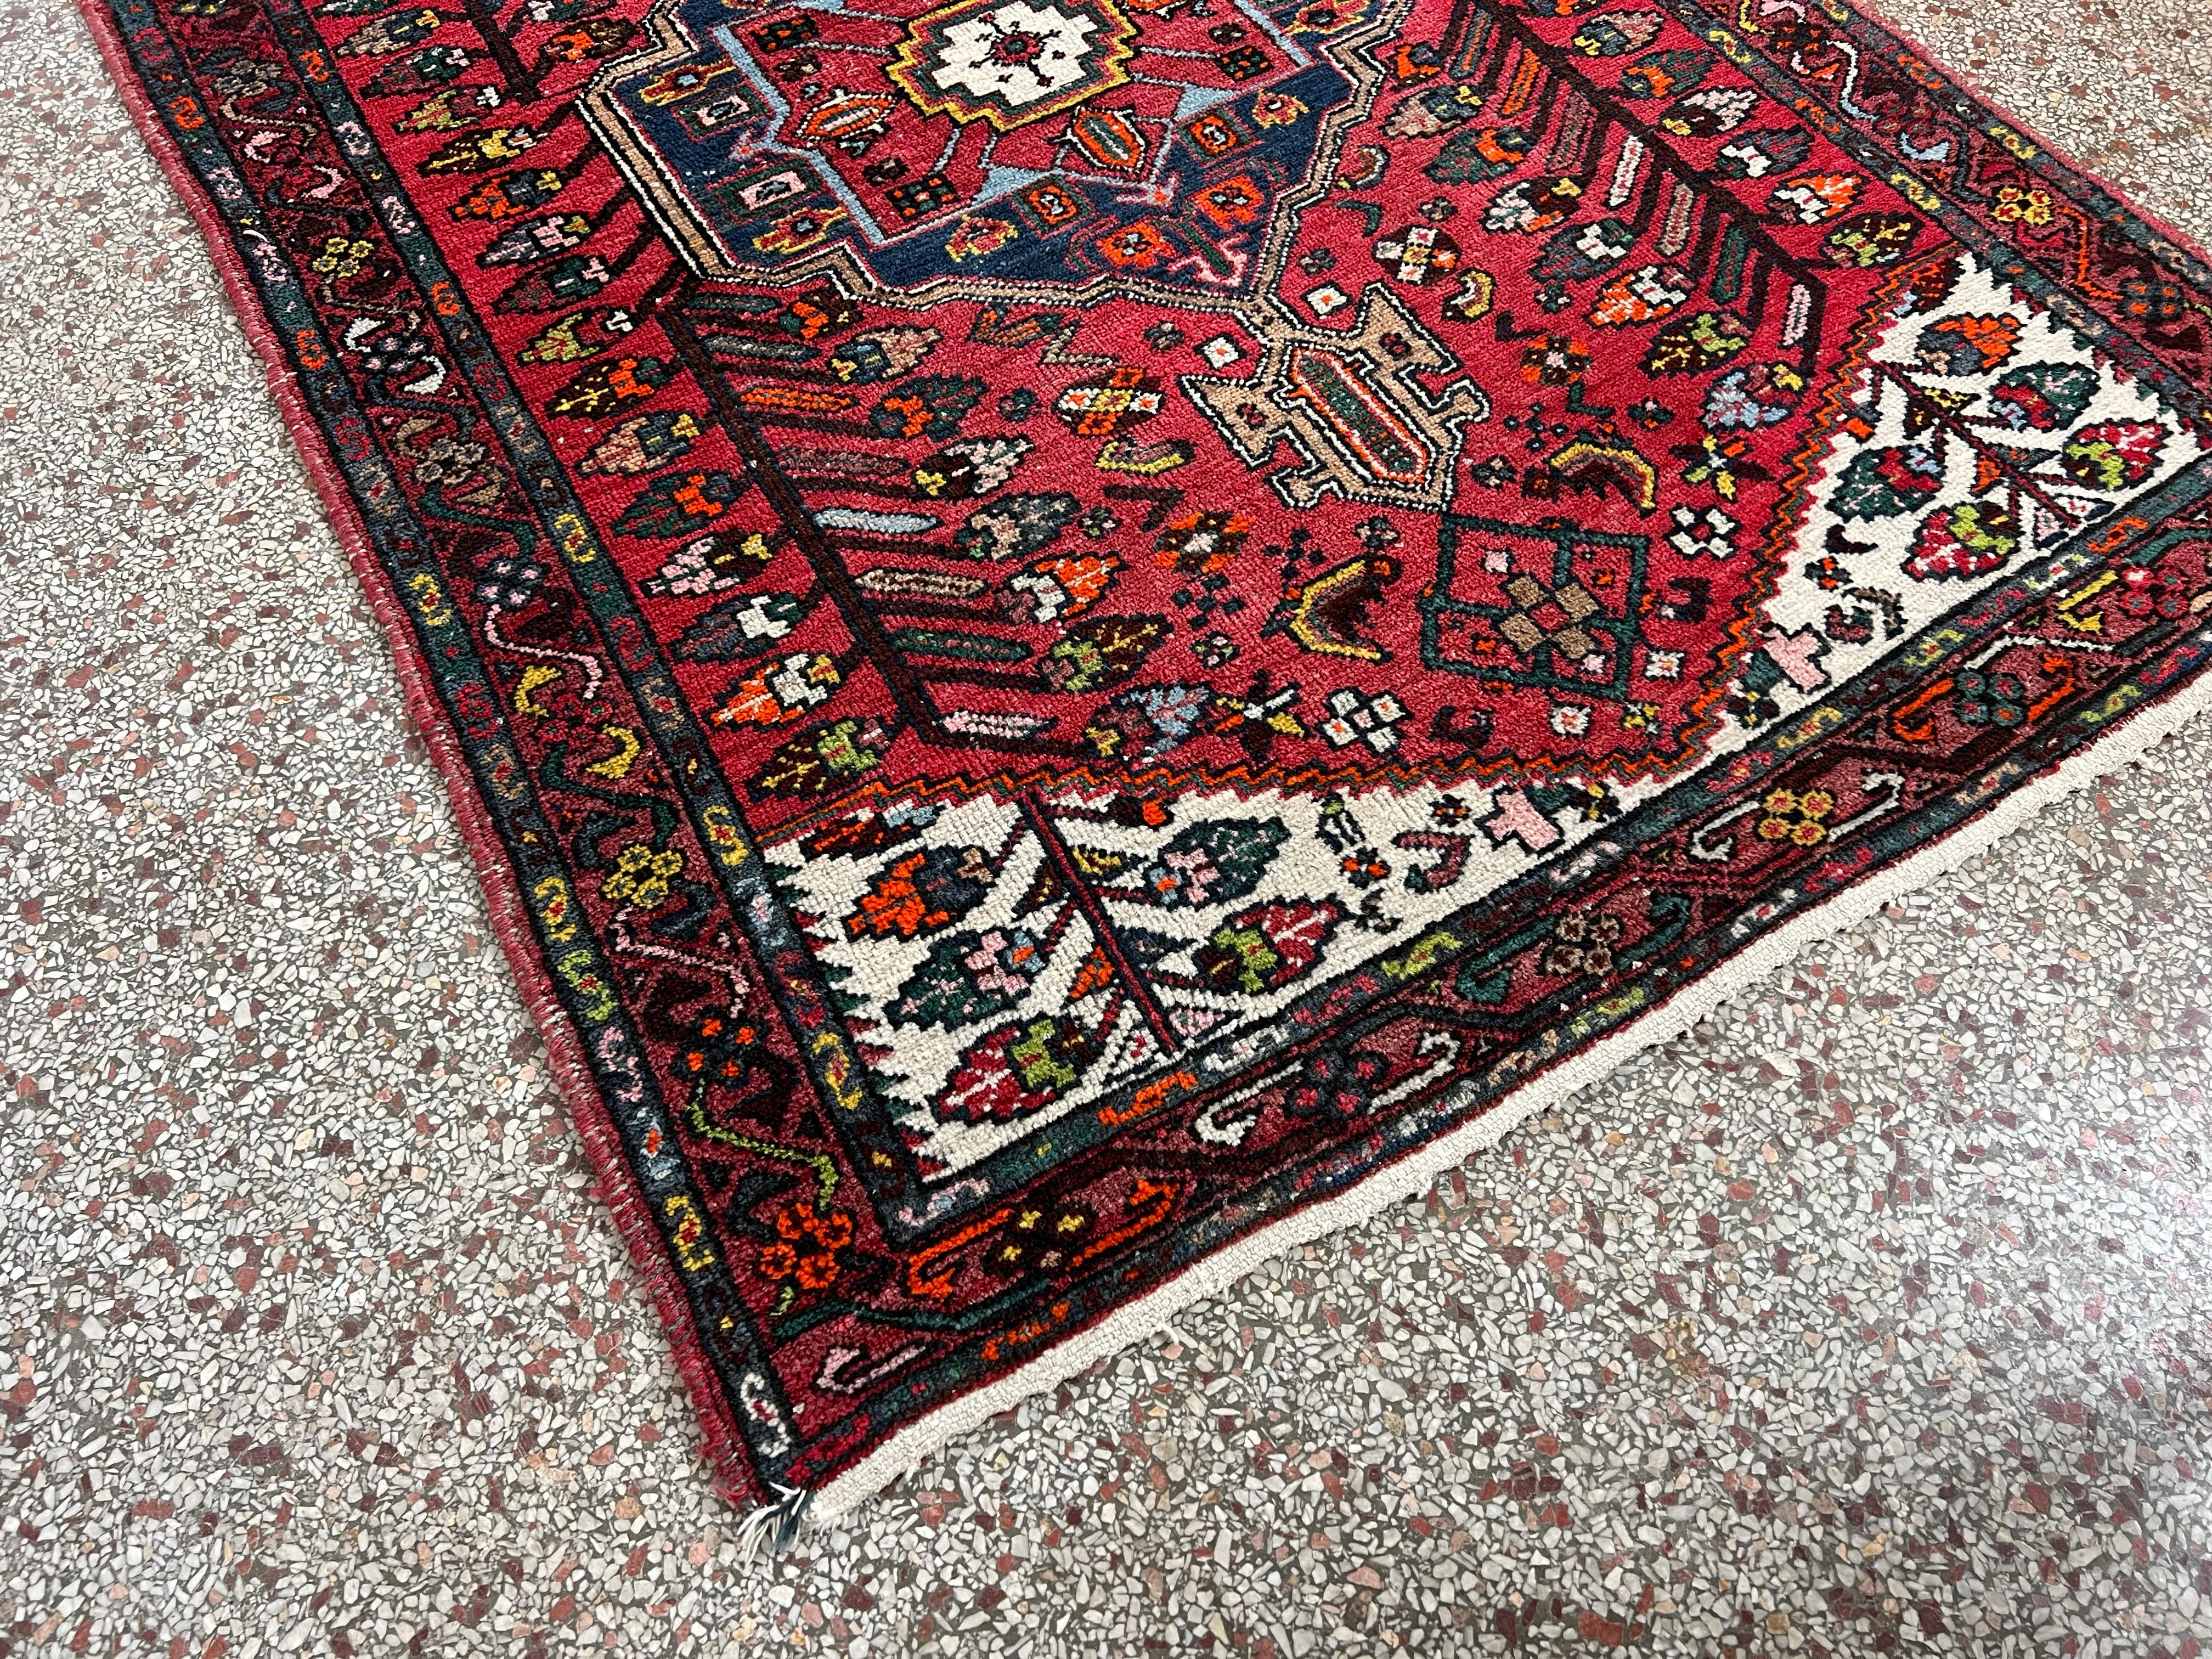 Vintage hand knotted Afghan tribal Baluchi 4'x6' wool area rug with intricate patterns in red, blues, whites and yellows. 

Origin: Middle East

Year: 1960s

Dimensions: 74